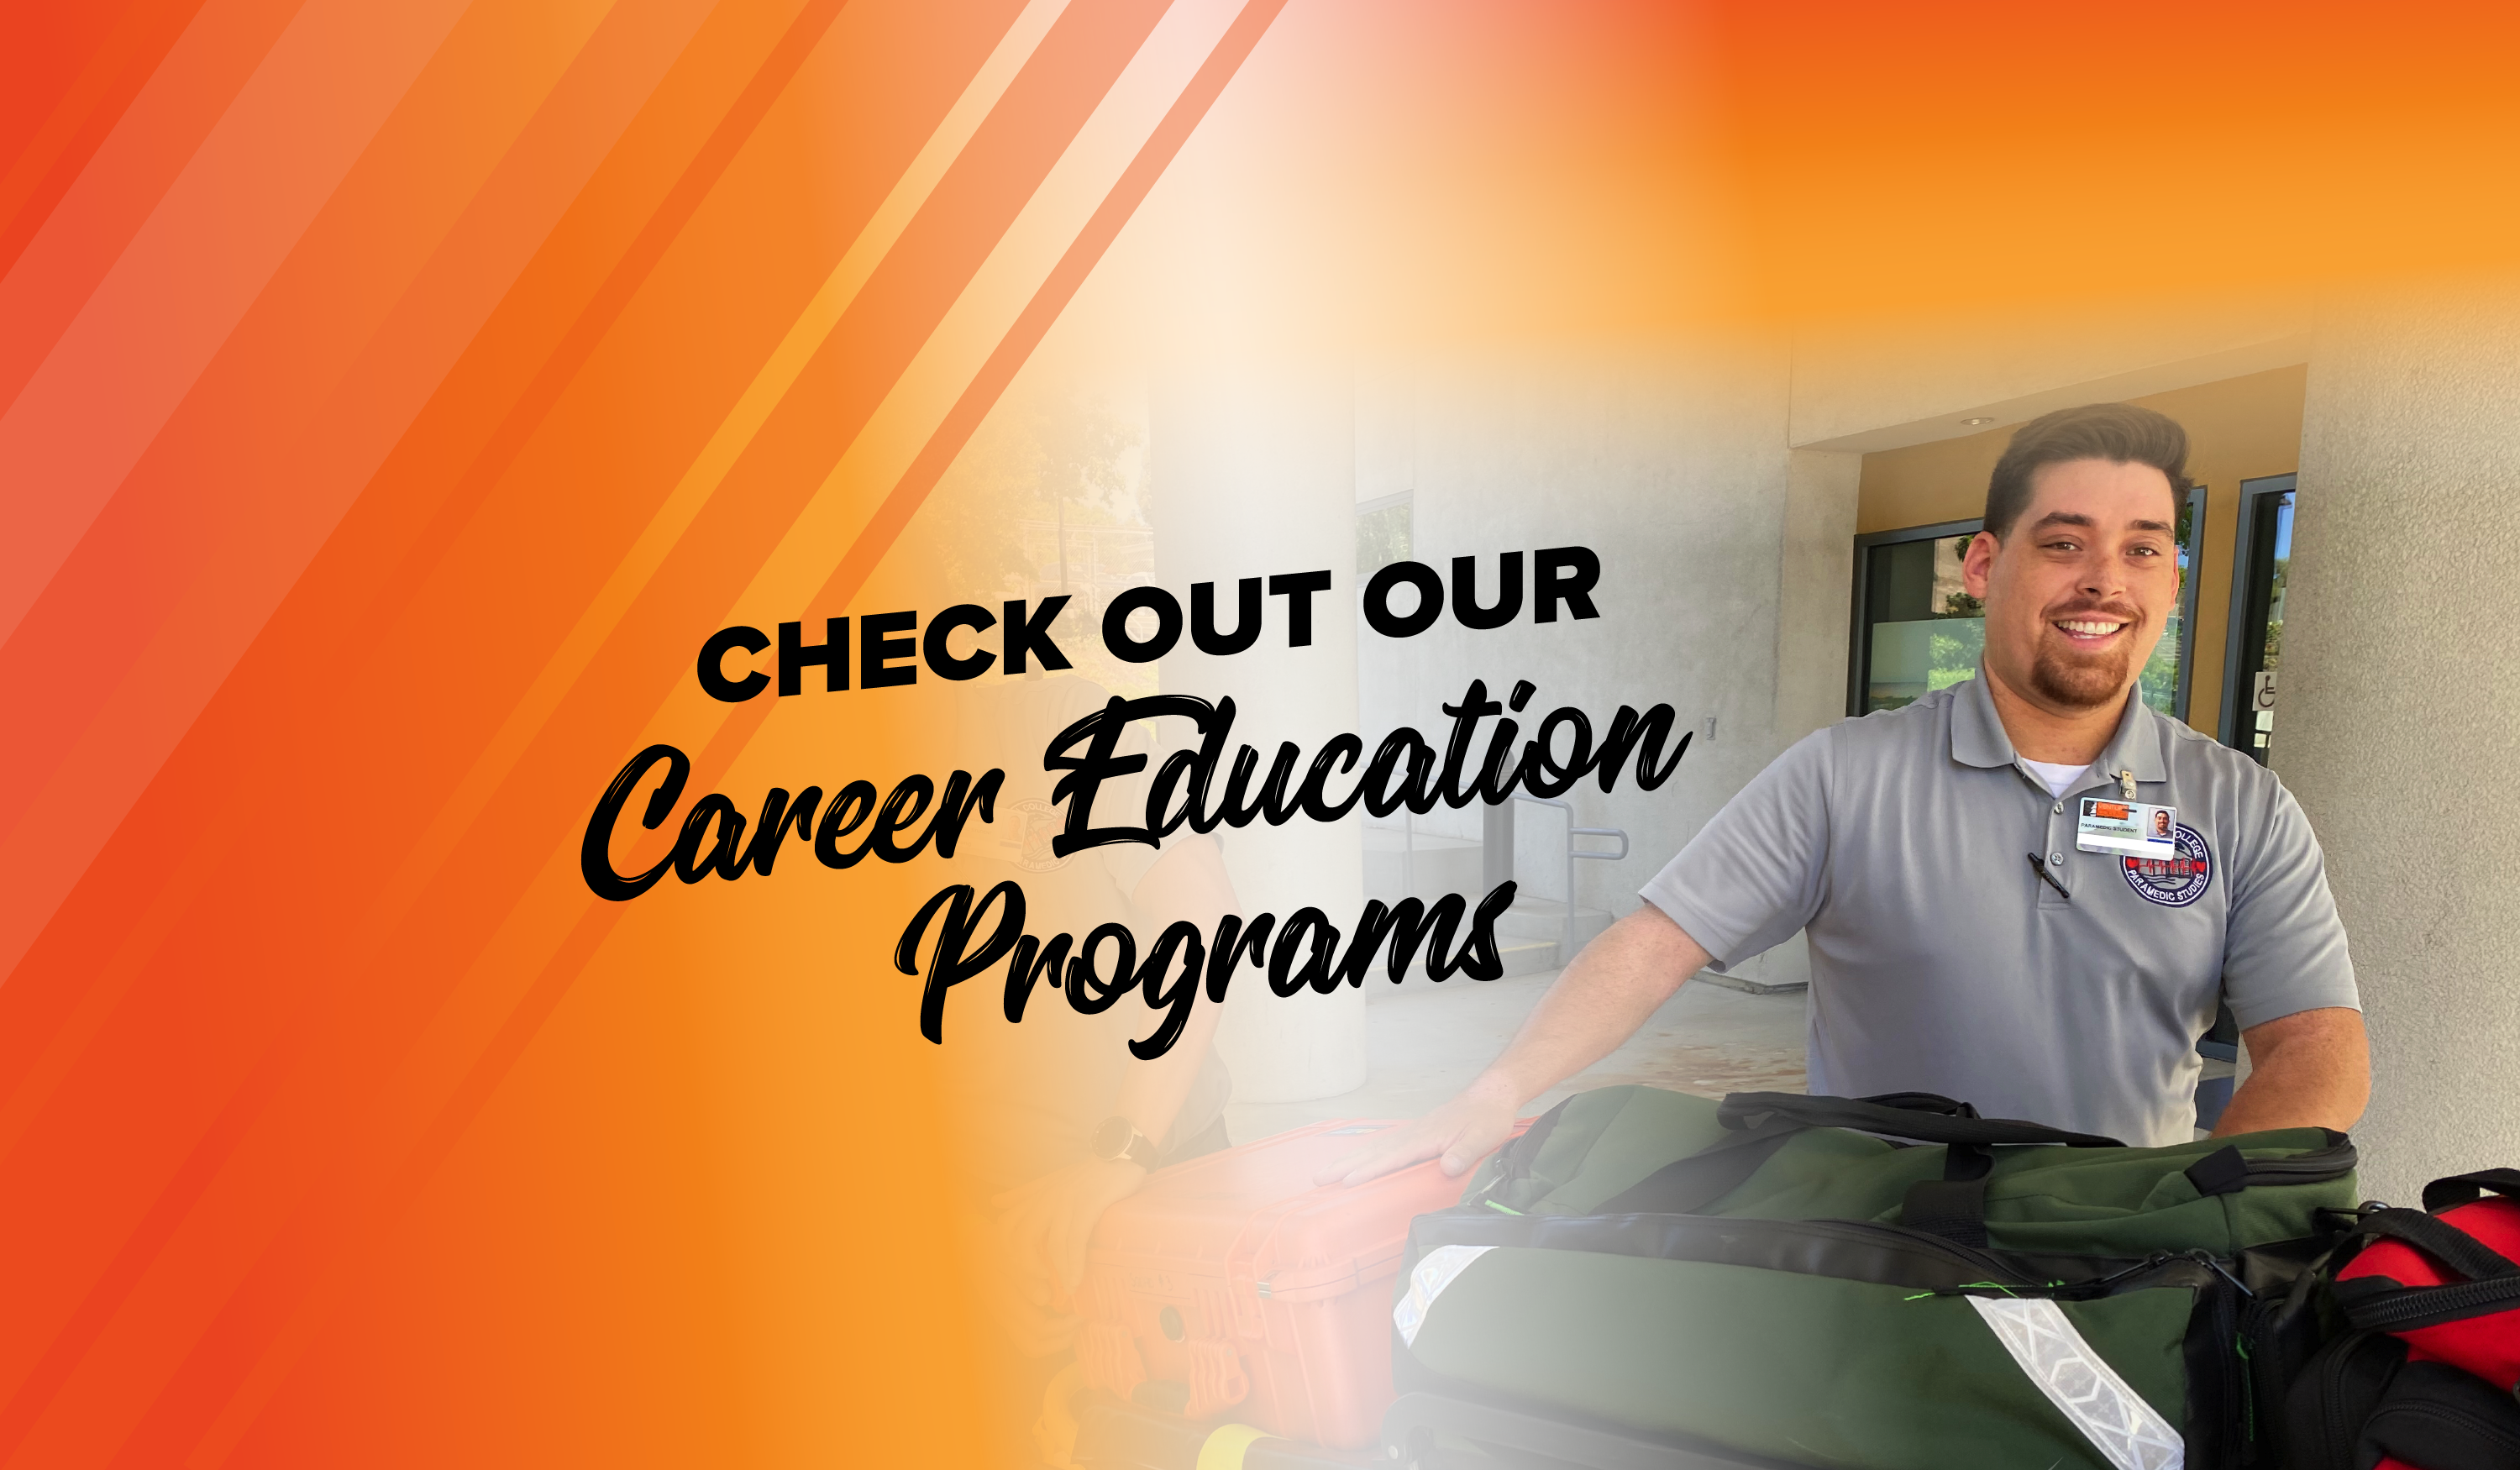 Check out our Career Education Programs